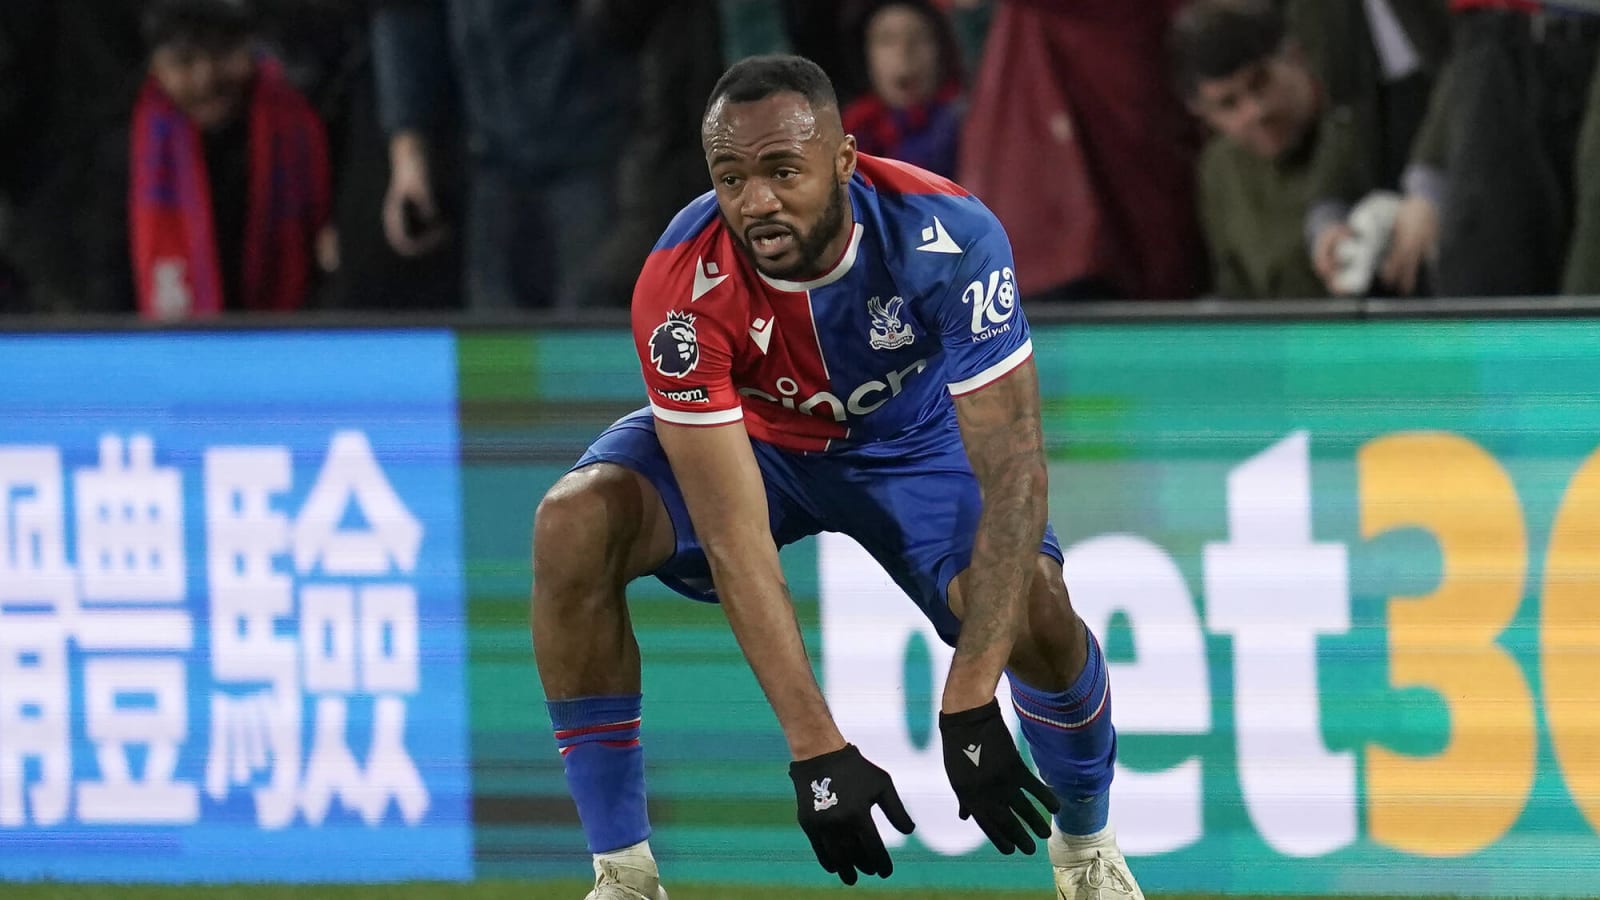 Watch: Ayew pokes home in first-half injury time to give Palace the lead against Brighton